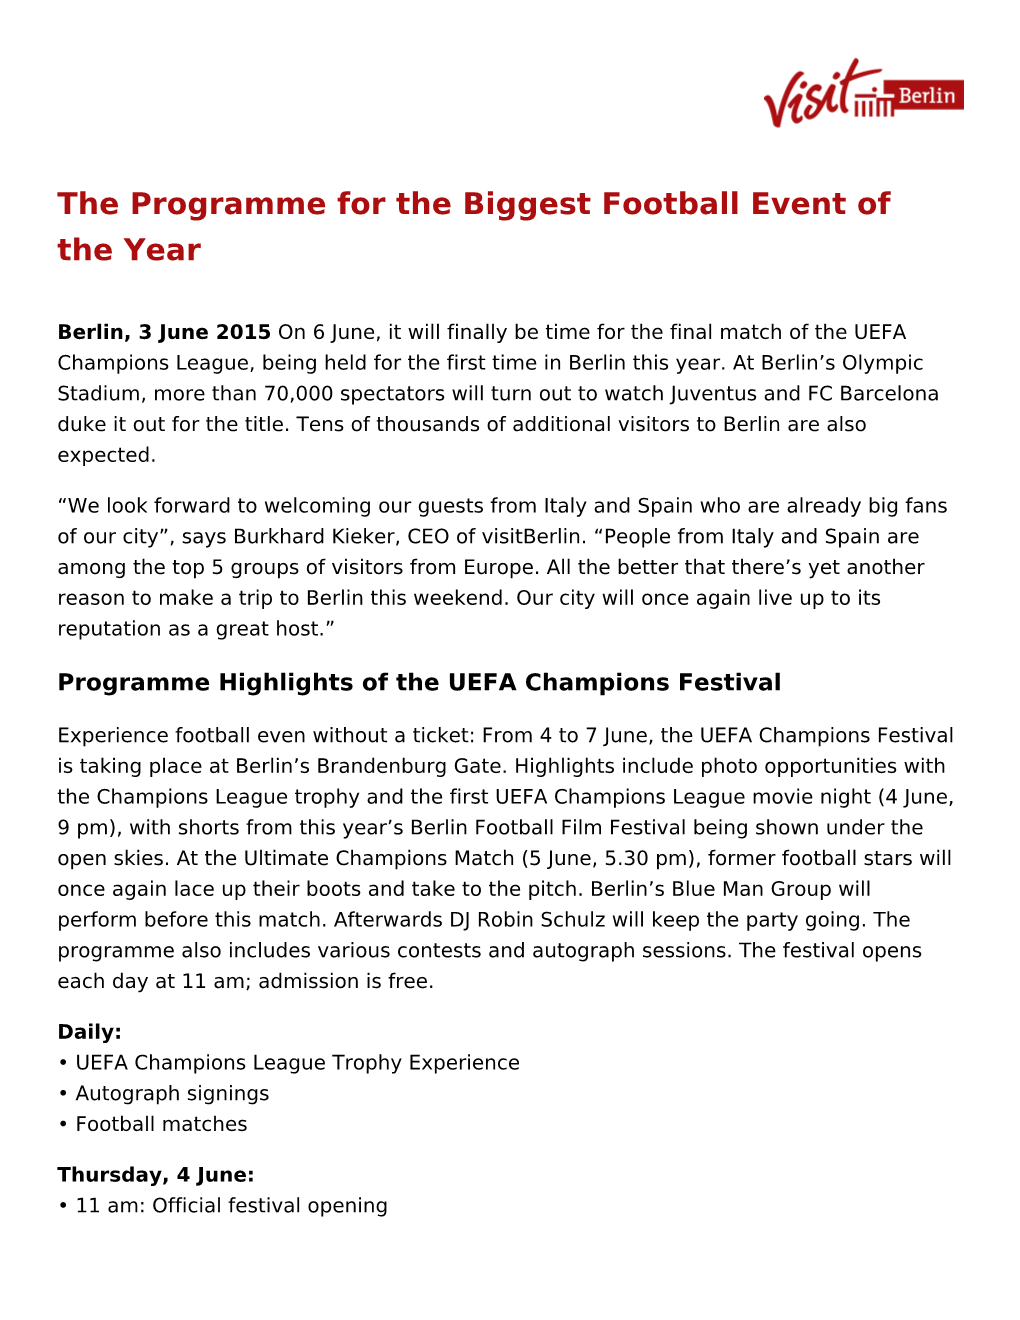 The Programme for the Biggest Football Event of the Year